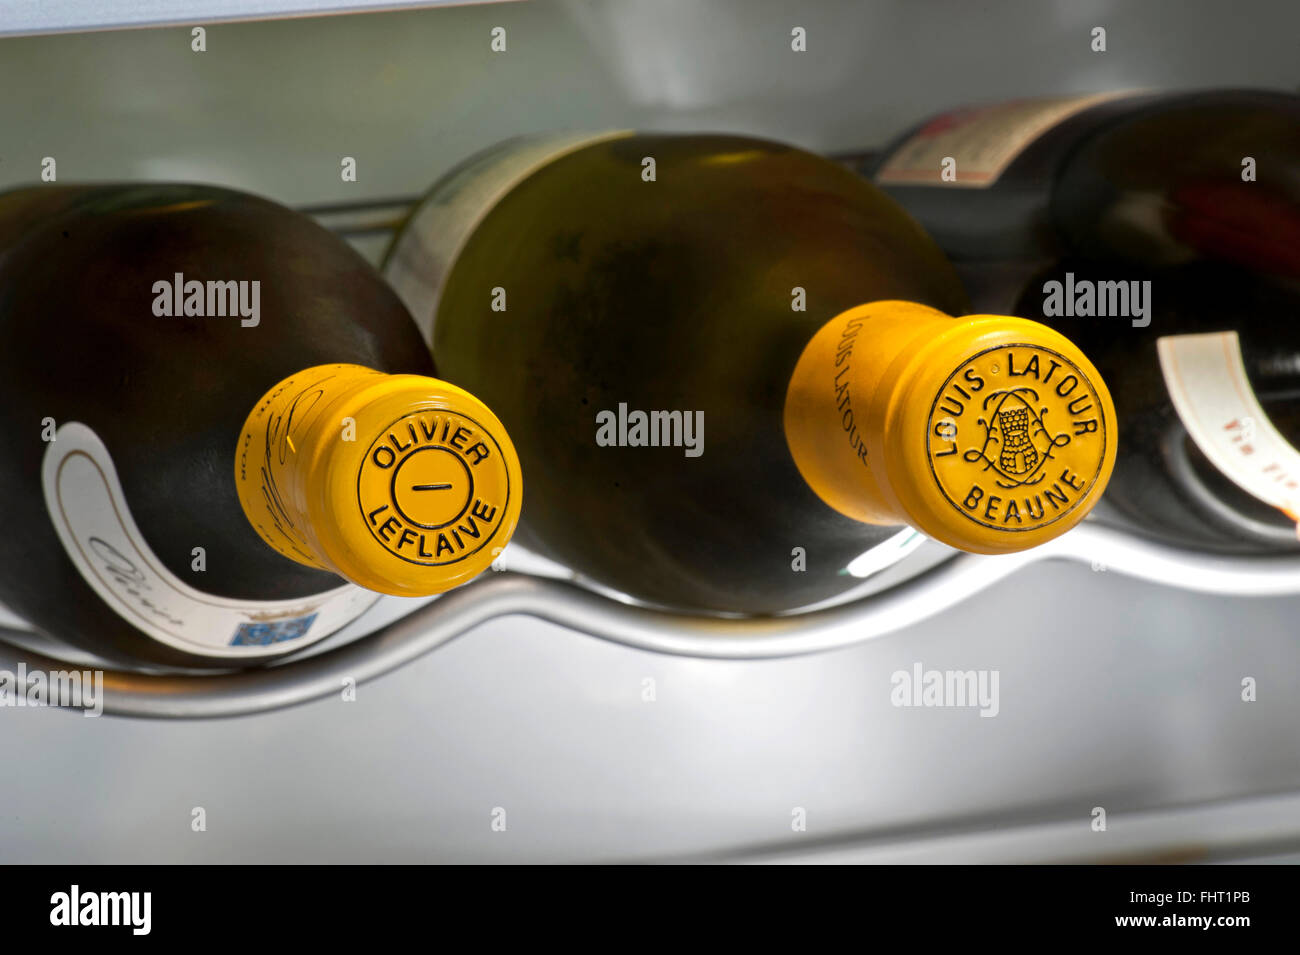 Burgundy white wine encapsulated bottle tops of Olivier Leflaive & Louis Latour white Burgundy wines in temperature controlled cabinet Stock Photo